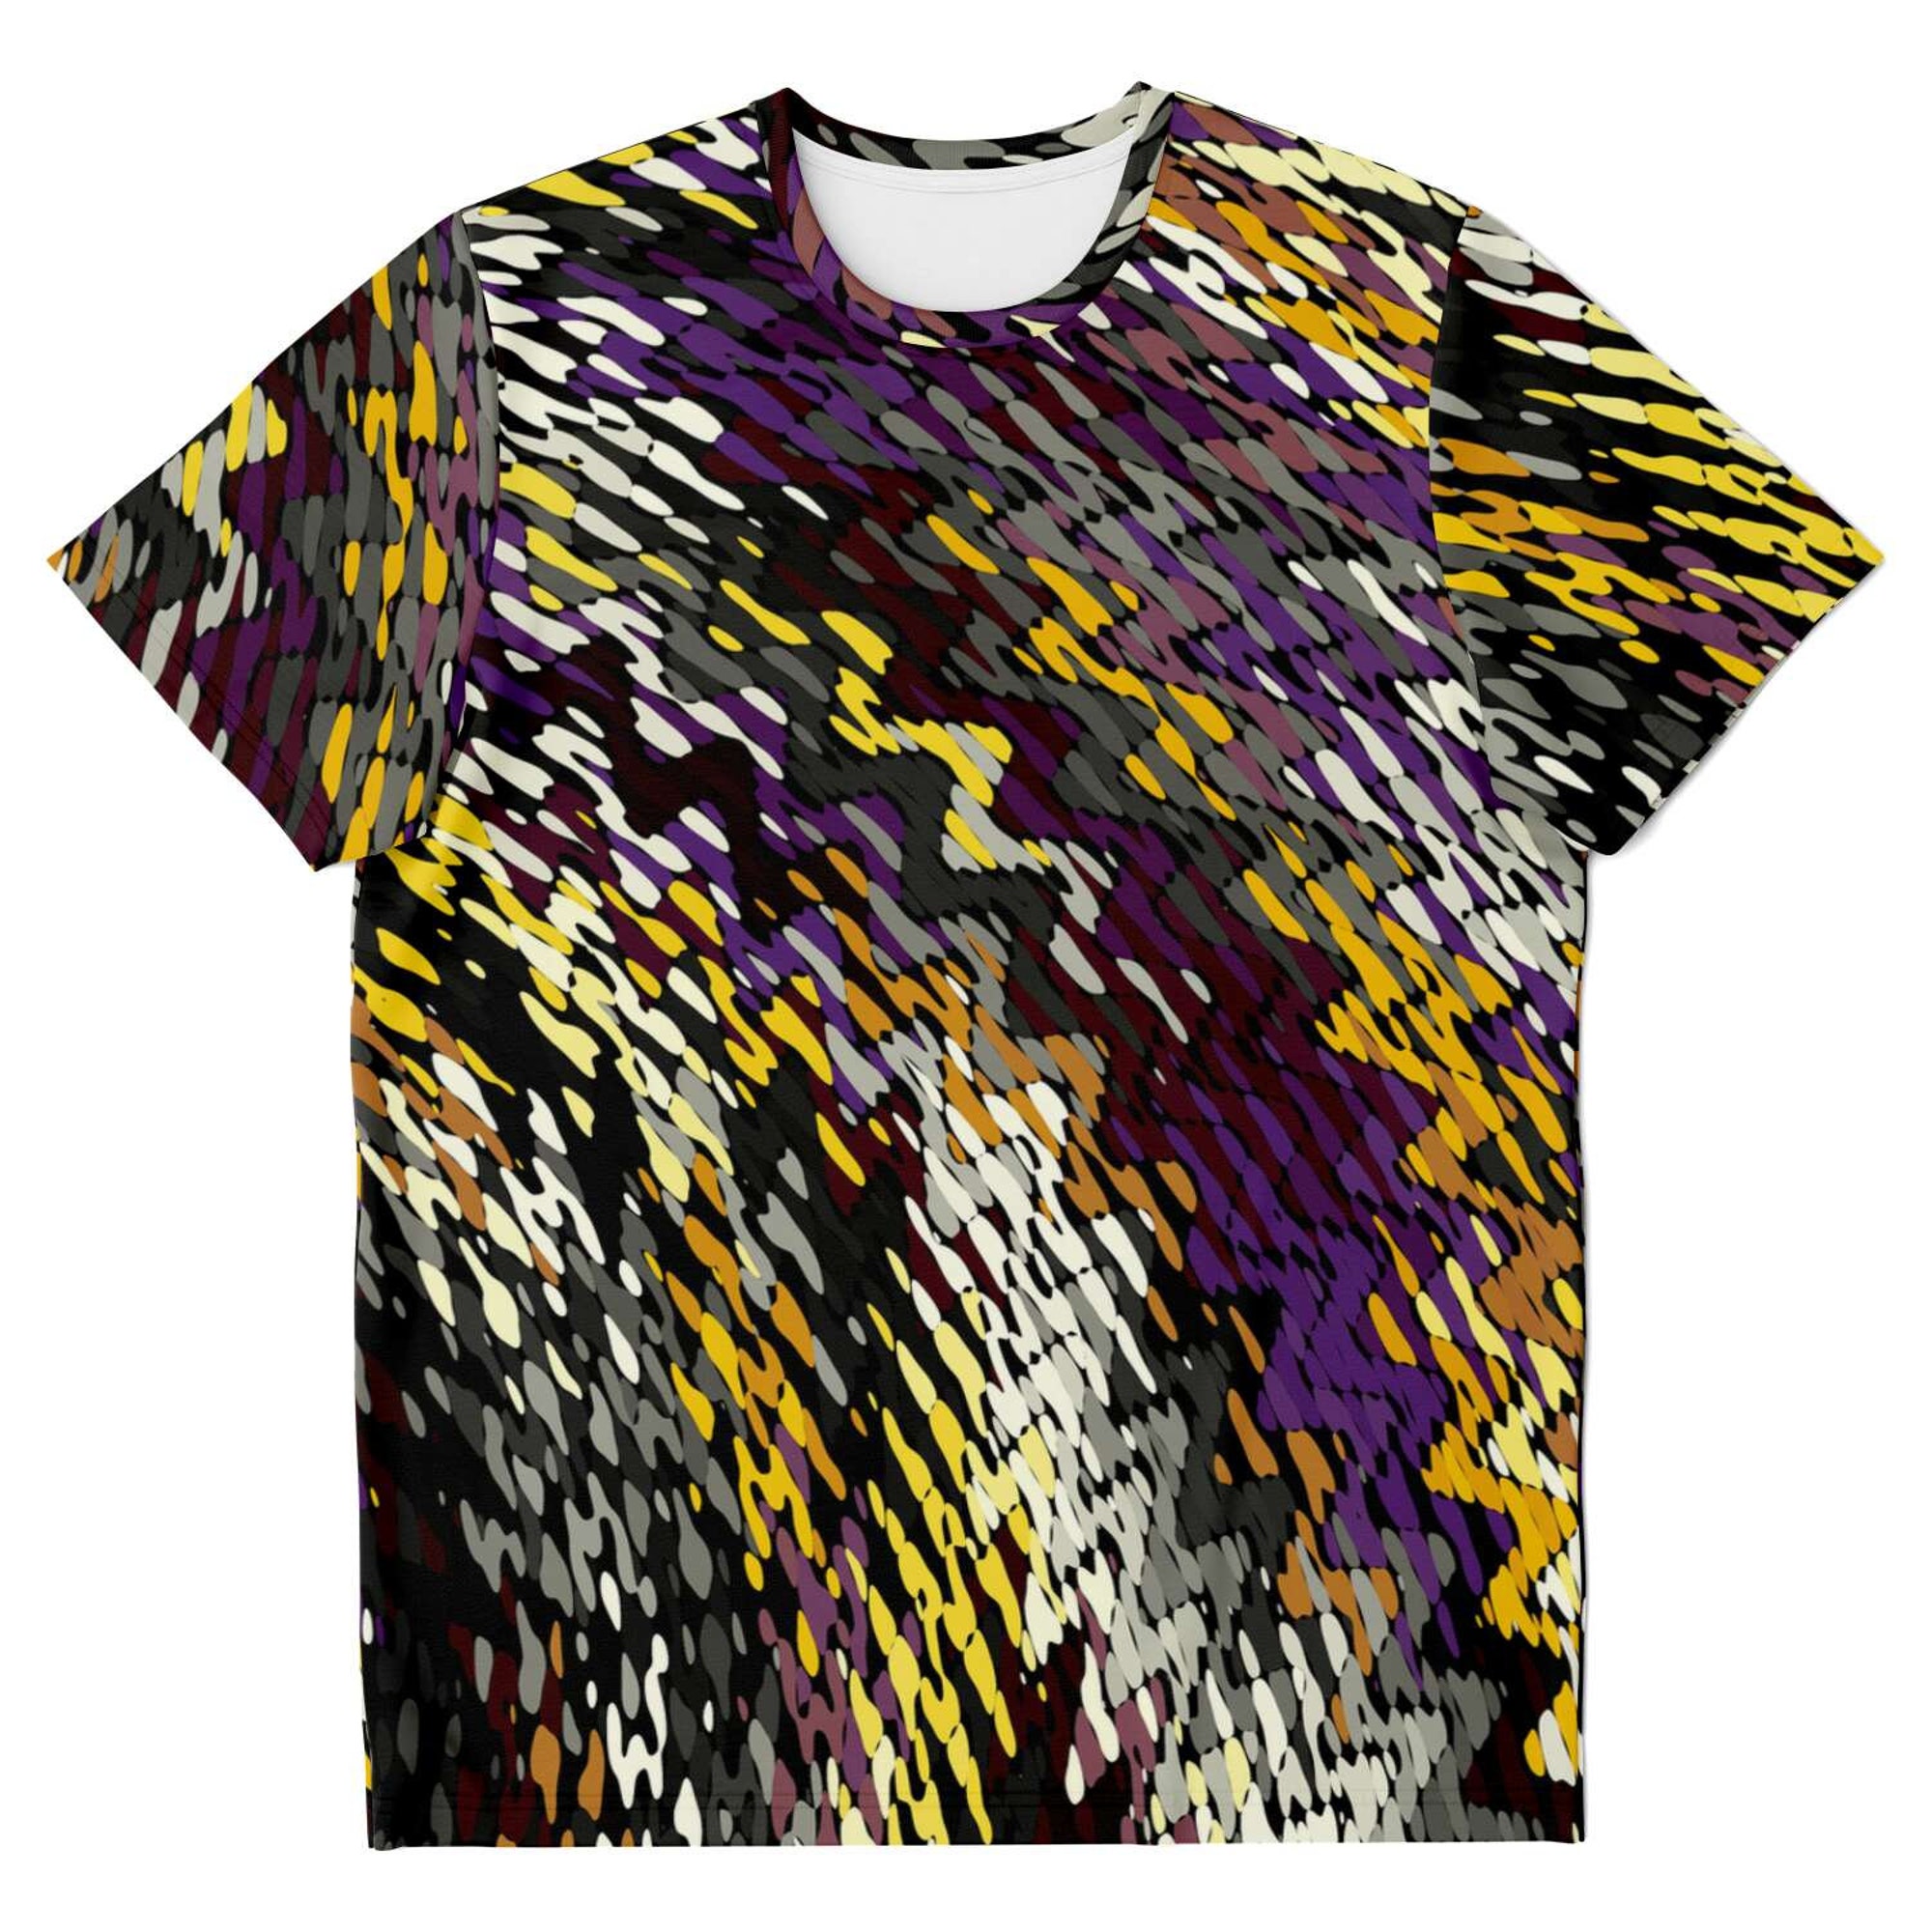 Discover Abstract Sporty Geometric Art Beach Casual Psychedelic 3D T Shirt